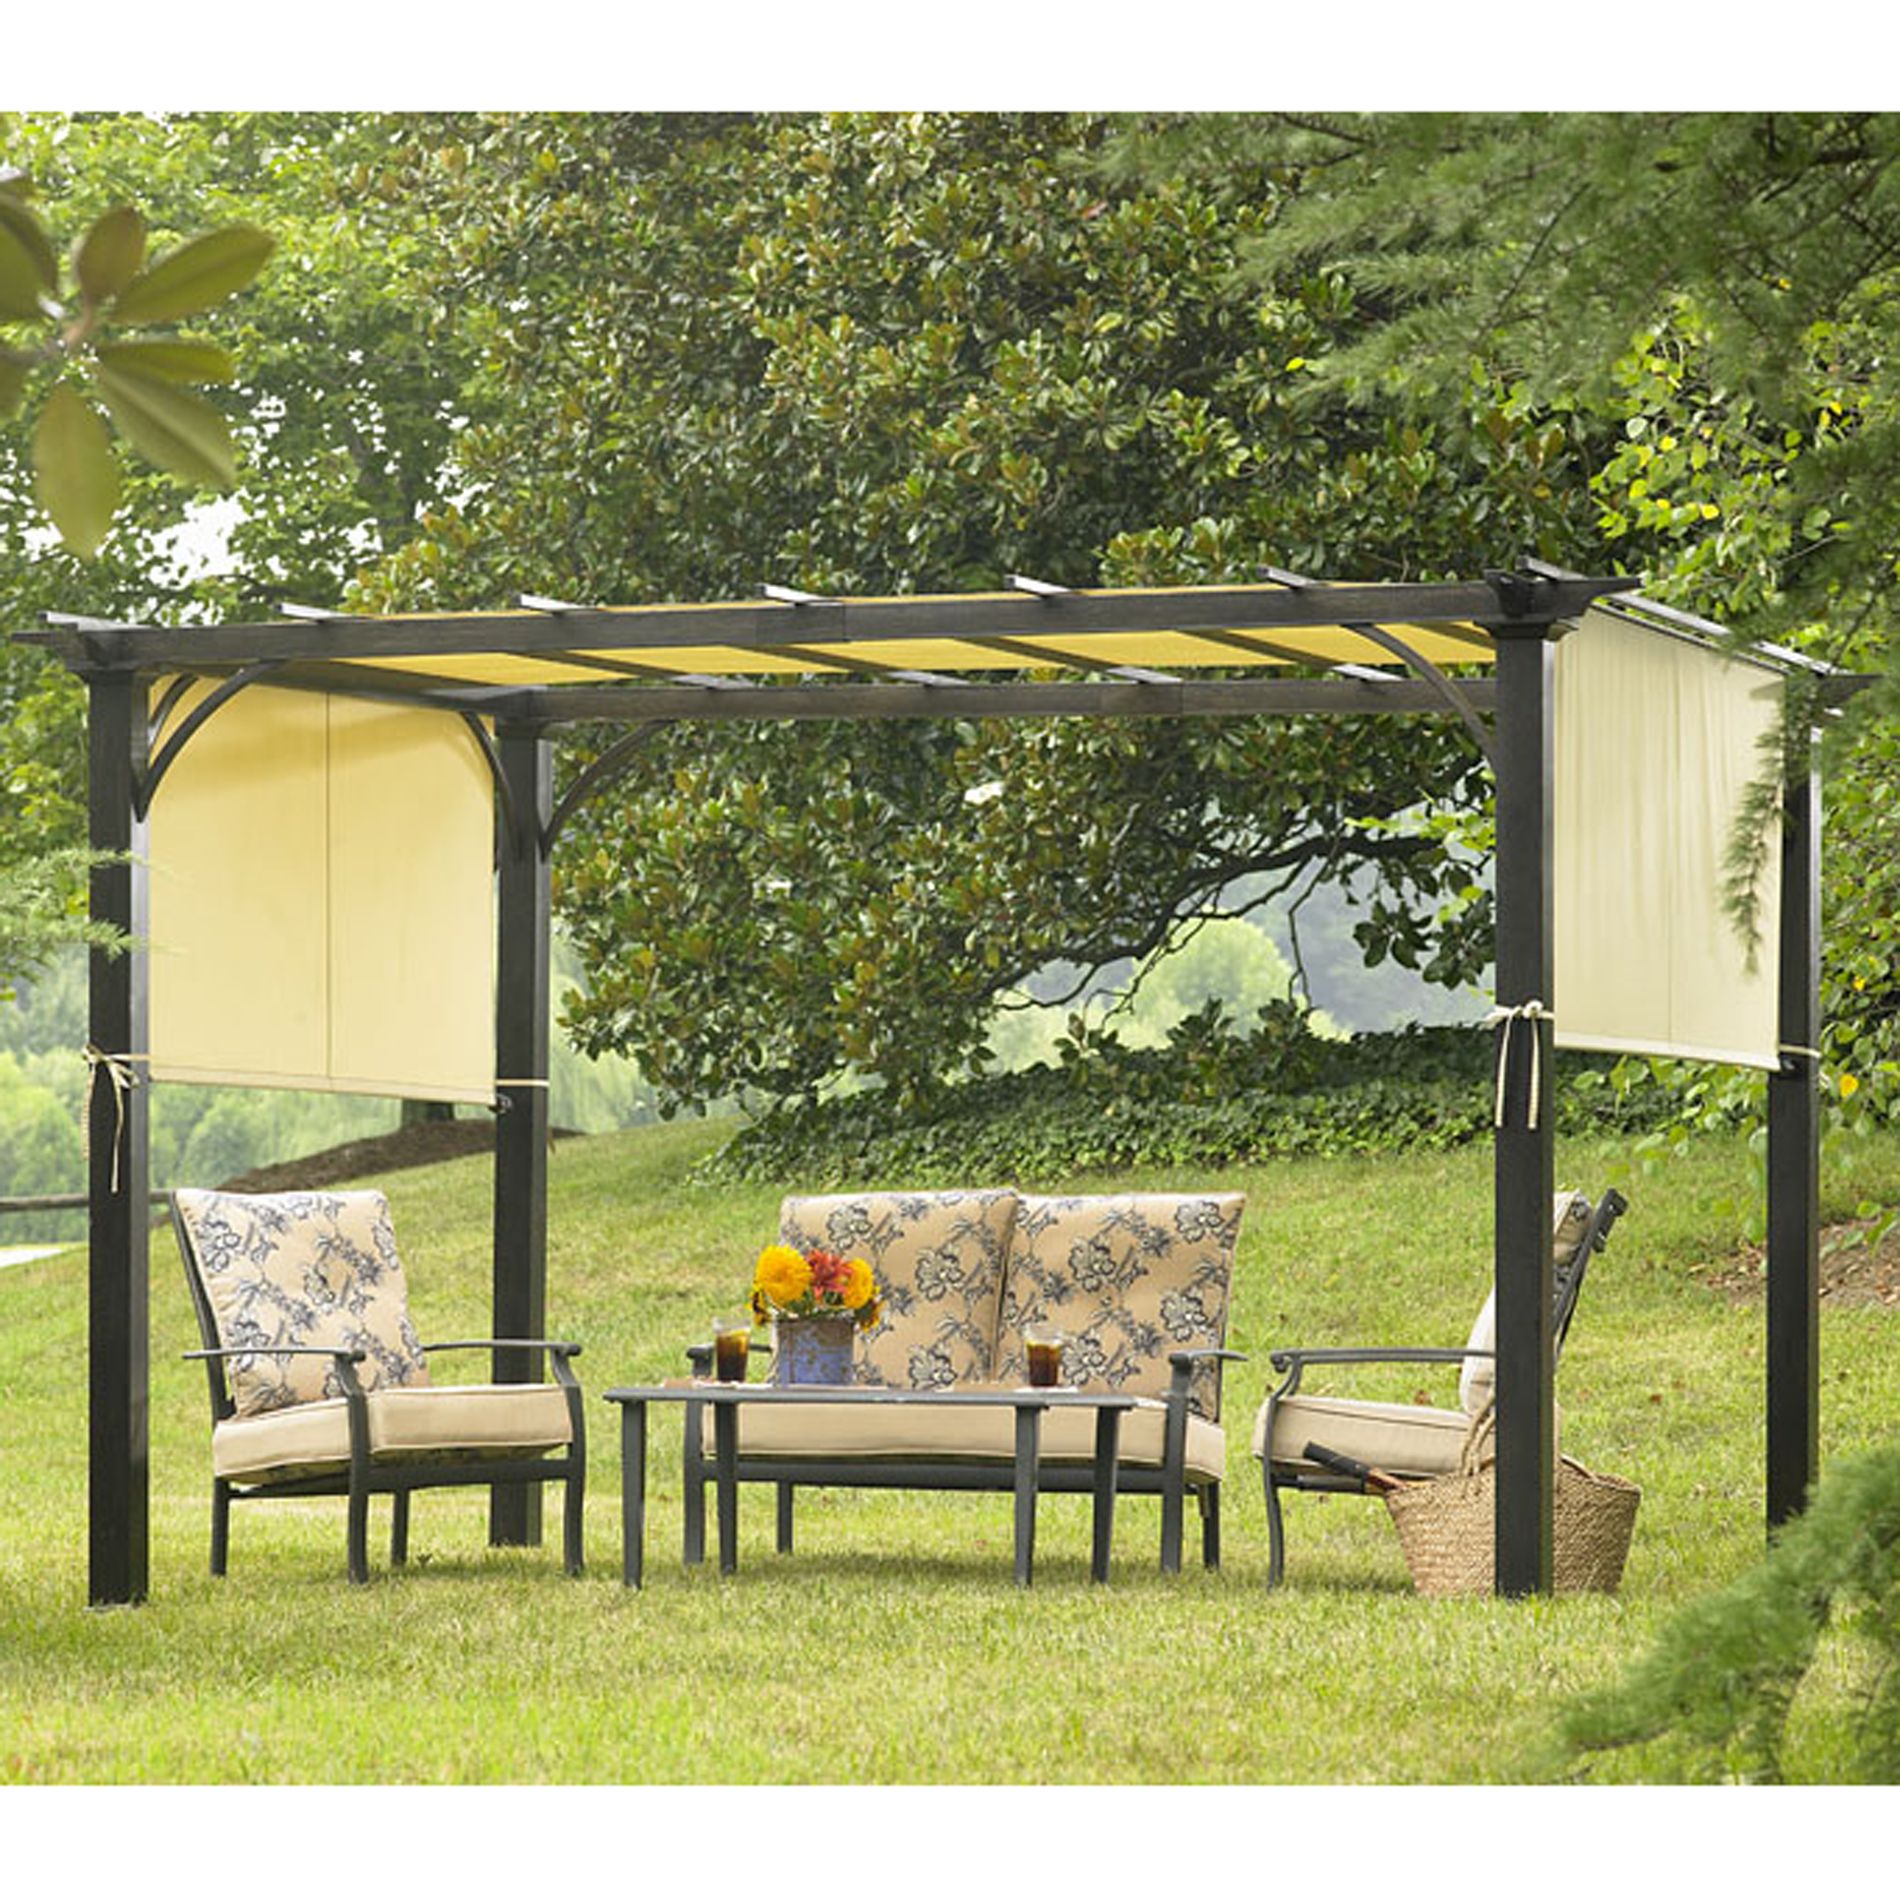 garden oasis - gf-10s063b - pergola deluxe shaded canopy | sears outlet